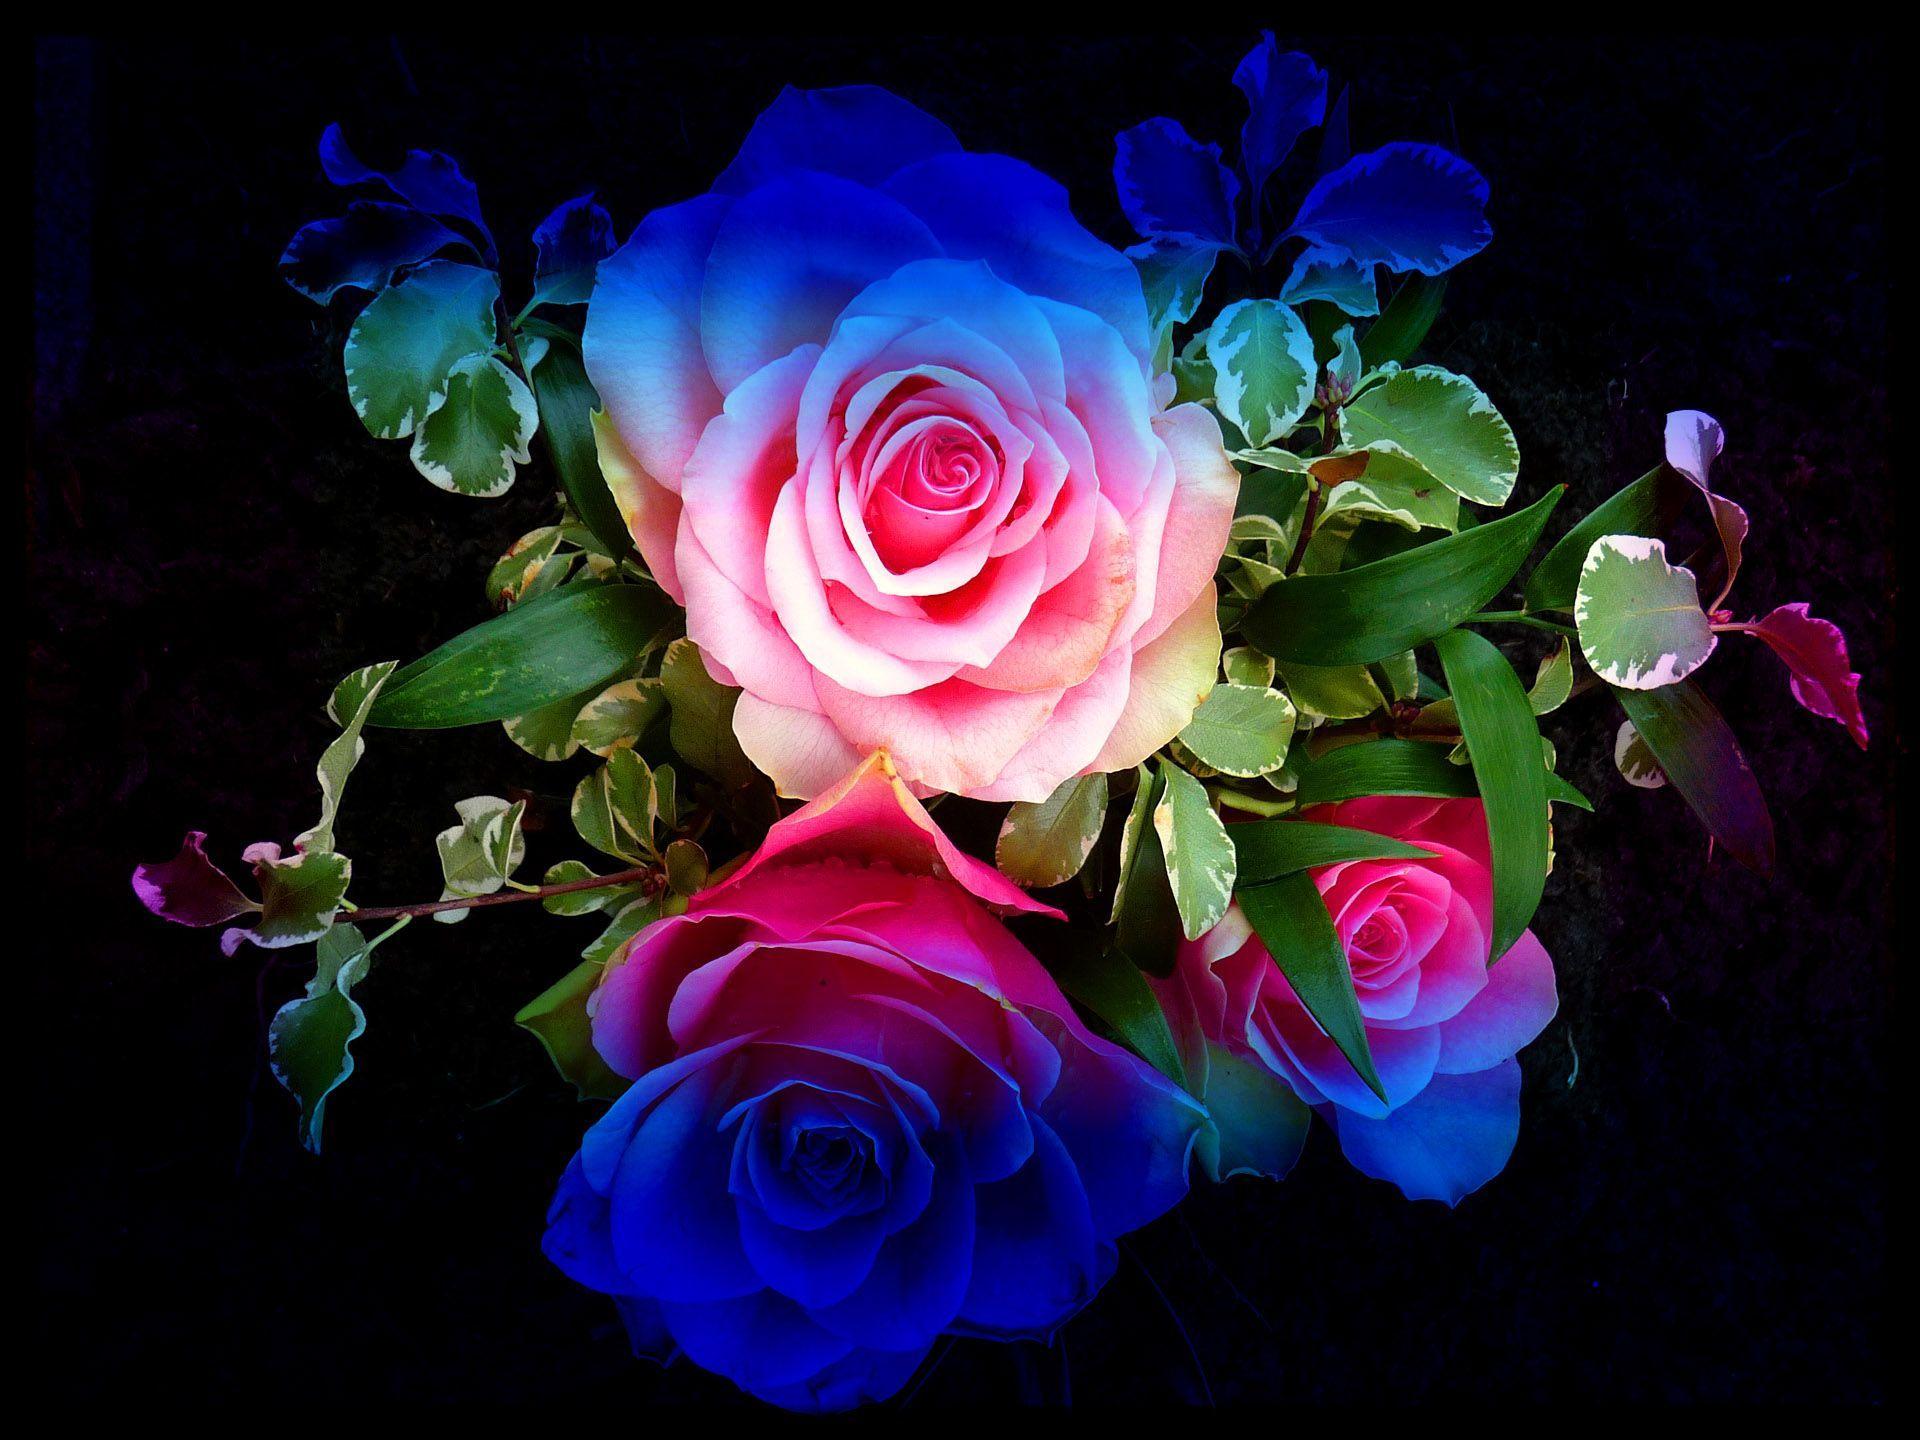 Colourful Roses, High Definition, High Quality, Widescreen. Colorful roses, Blue roses wallpaper, Rose wallpaper